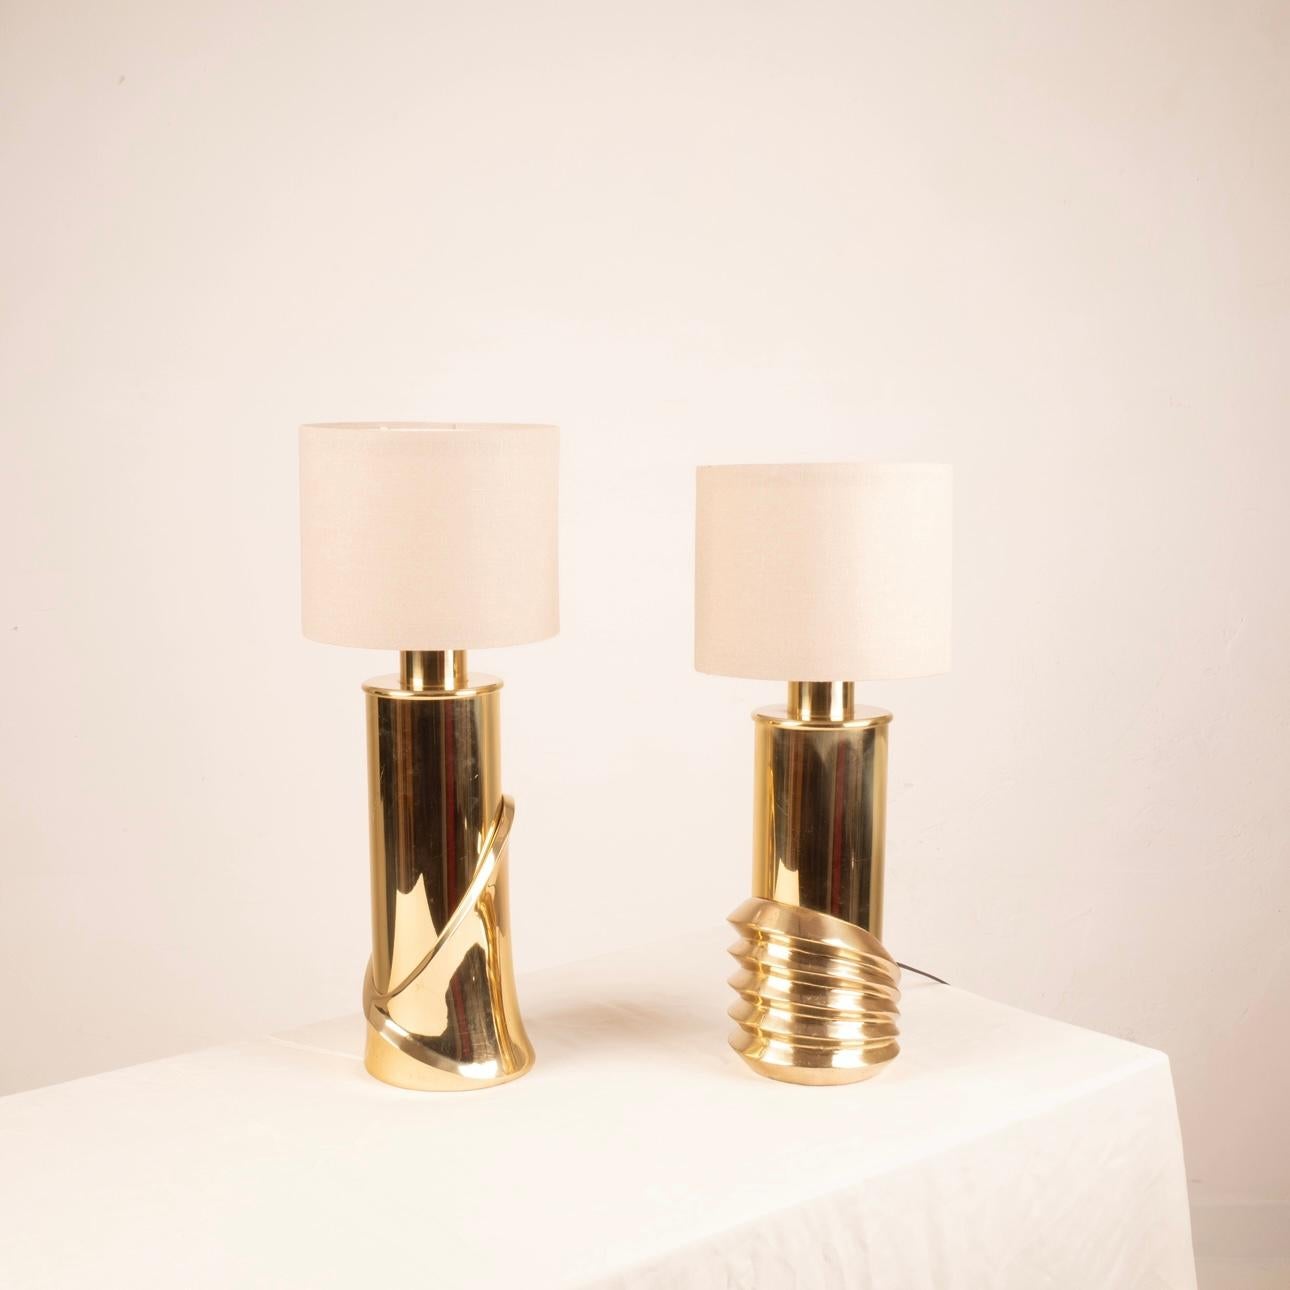 Late 20th Century Pair of Brass Lamps by Luciano Frigerio for Frigerio of Desio For Sale